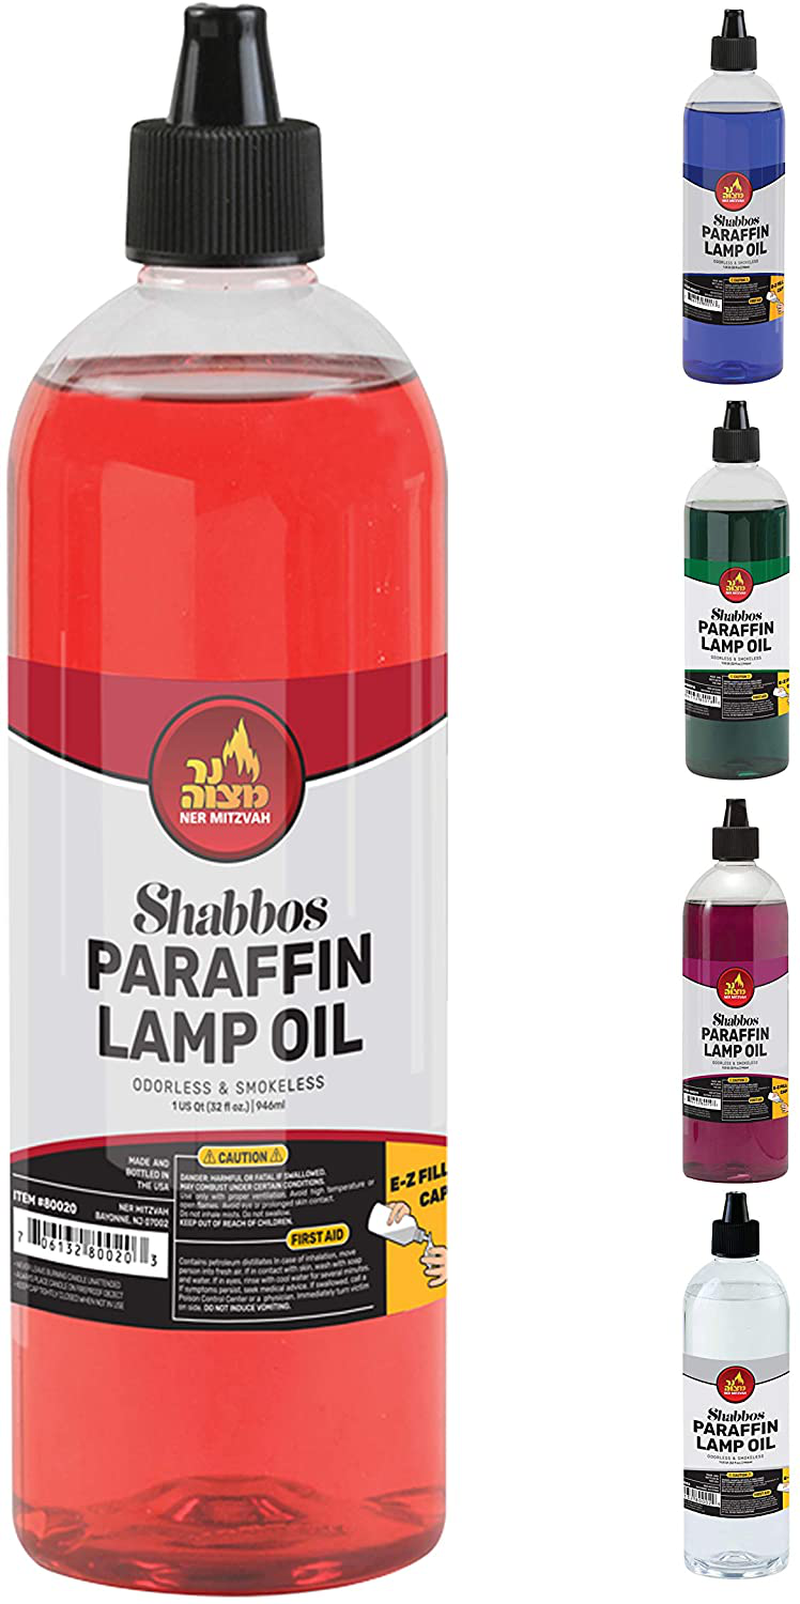 Paraffin Lamp Oil - Red Smokeless, Odorless, Clean Burning Fuel for Indoor and Outdoor Use with E-Z Fill Cap and Pouring Spout - 32oz - by Ner Mitzvah Home & Garden > Lighting Accessories > Oil Lamp Fuel Ner Mitzvah   